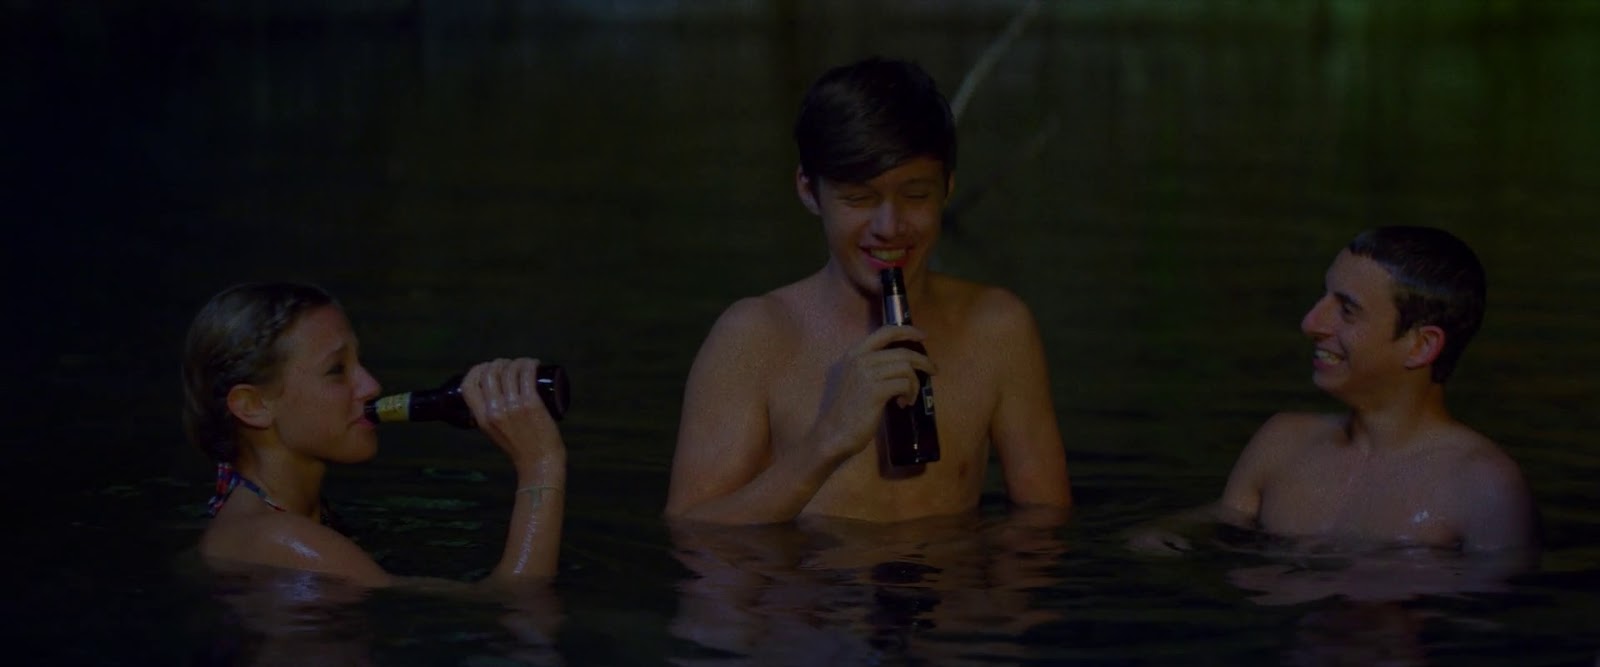 Nick Robinson - Shirtless & Barefoot in "The Kings of Summer"...